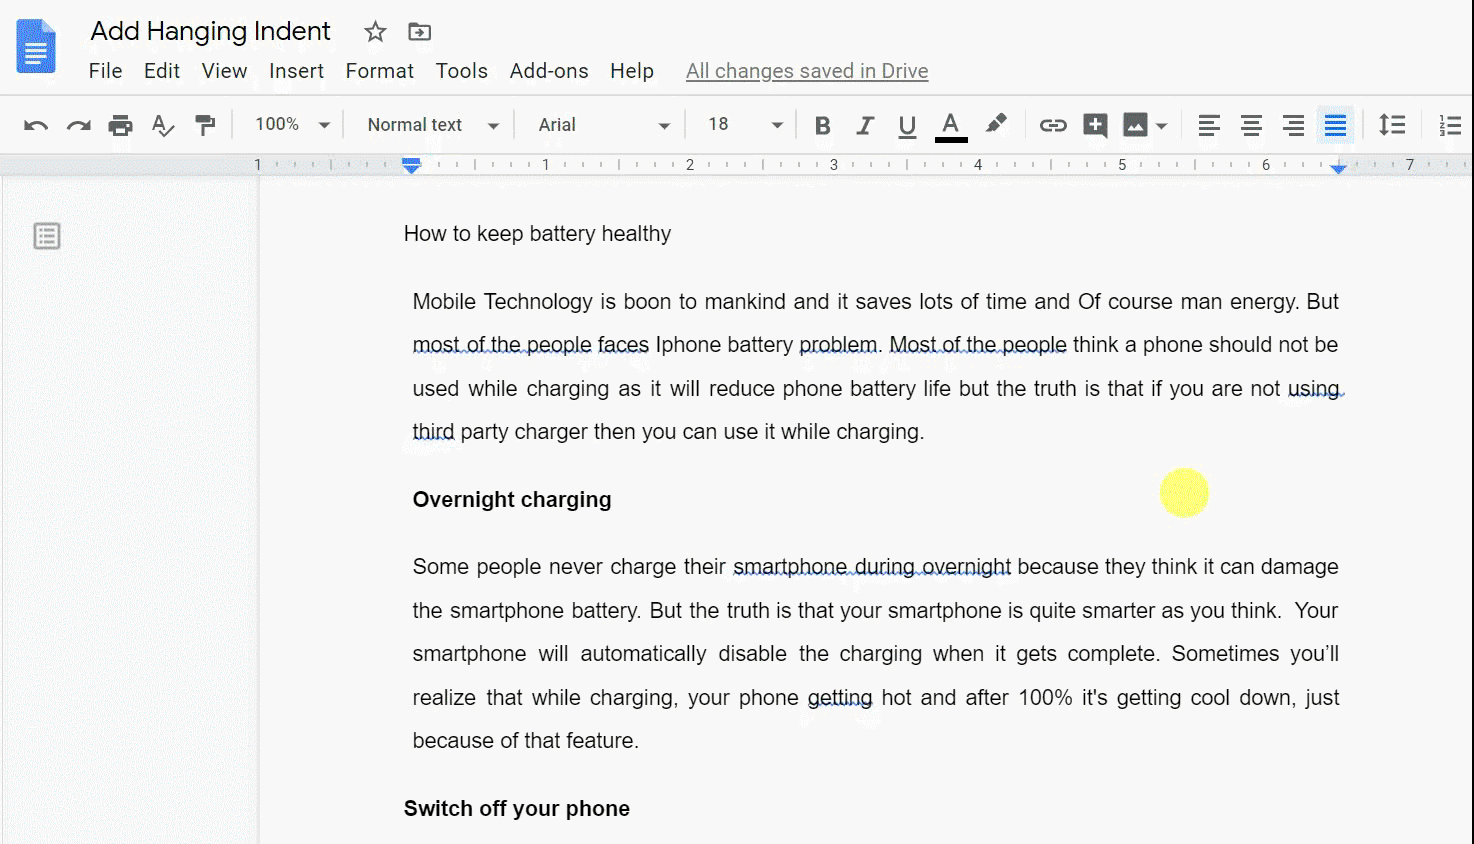 How to make a hanging indent on Google docs